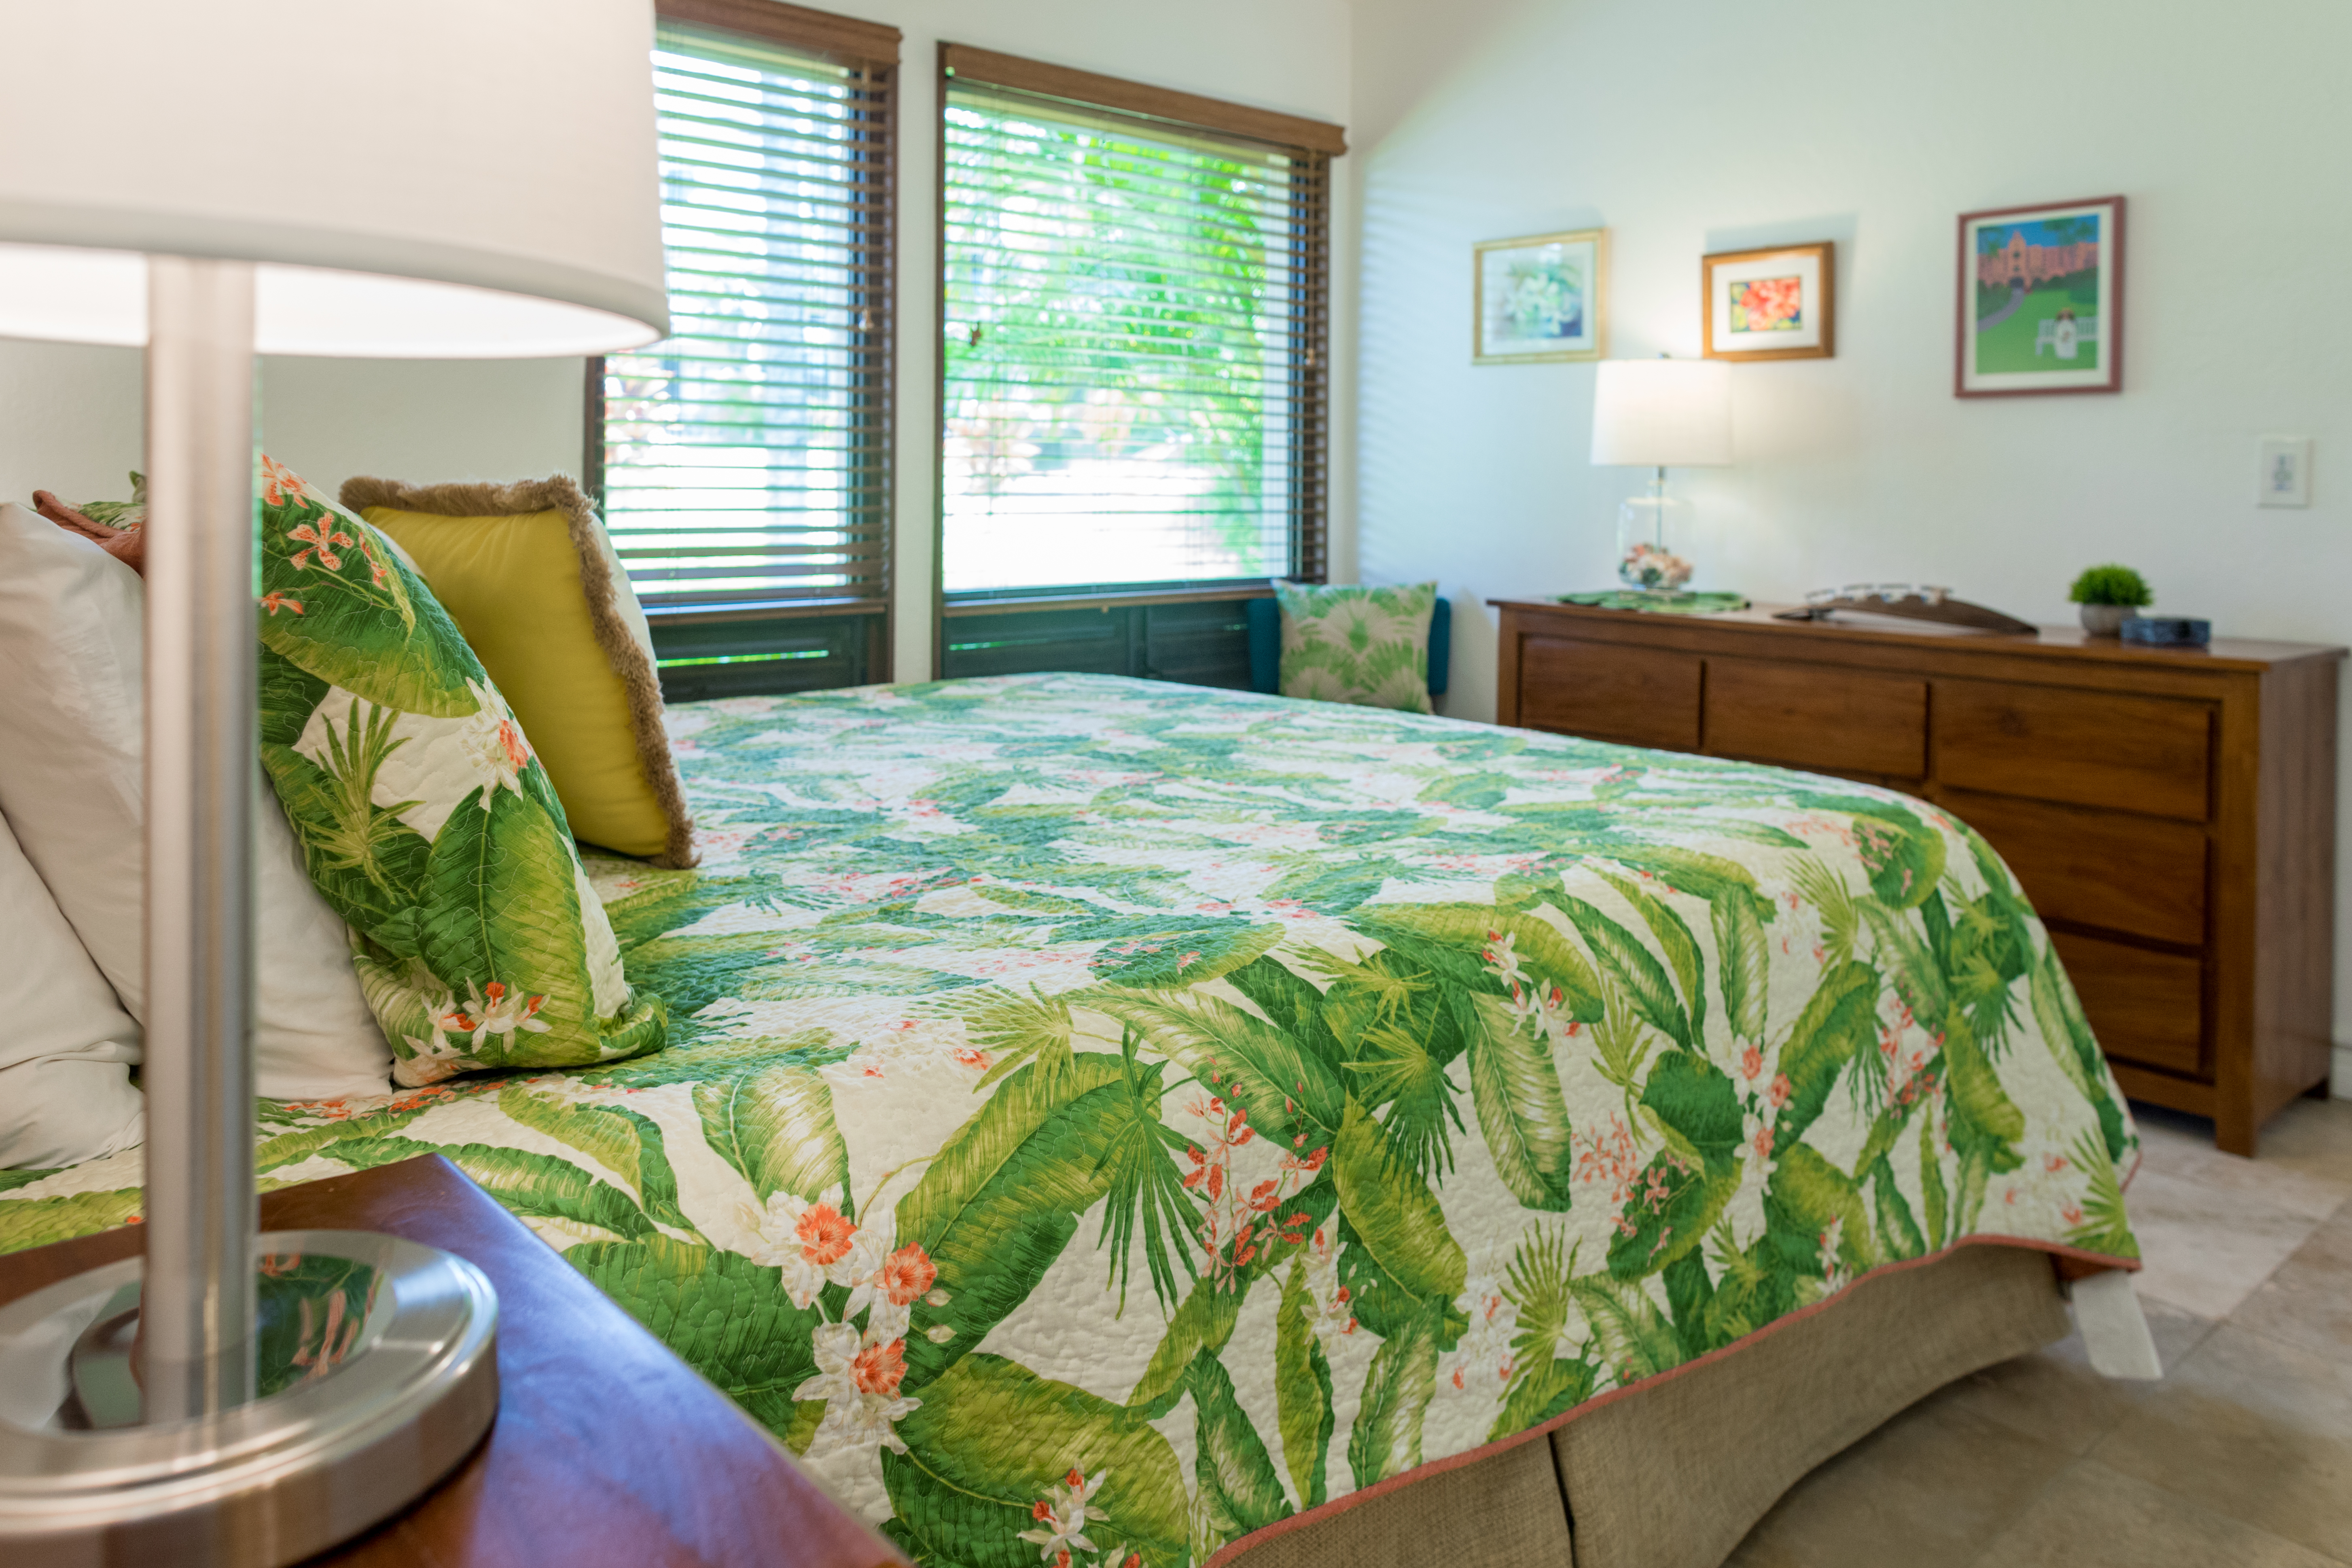 Kahala 312 Master Bedroom with garden view and modern, tropical decor.